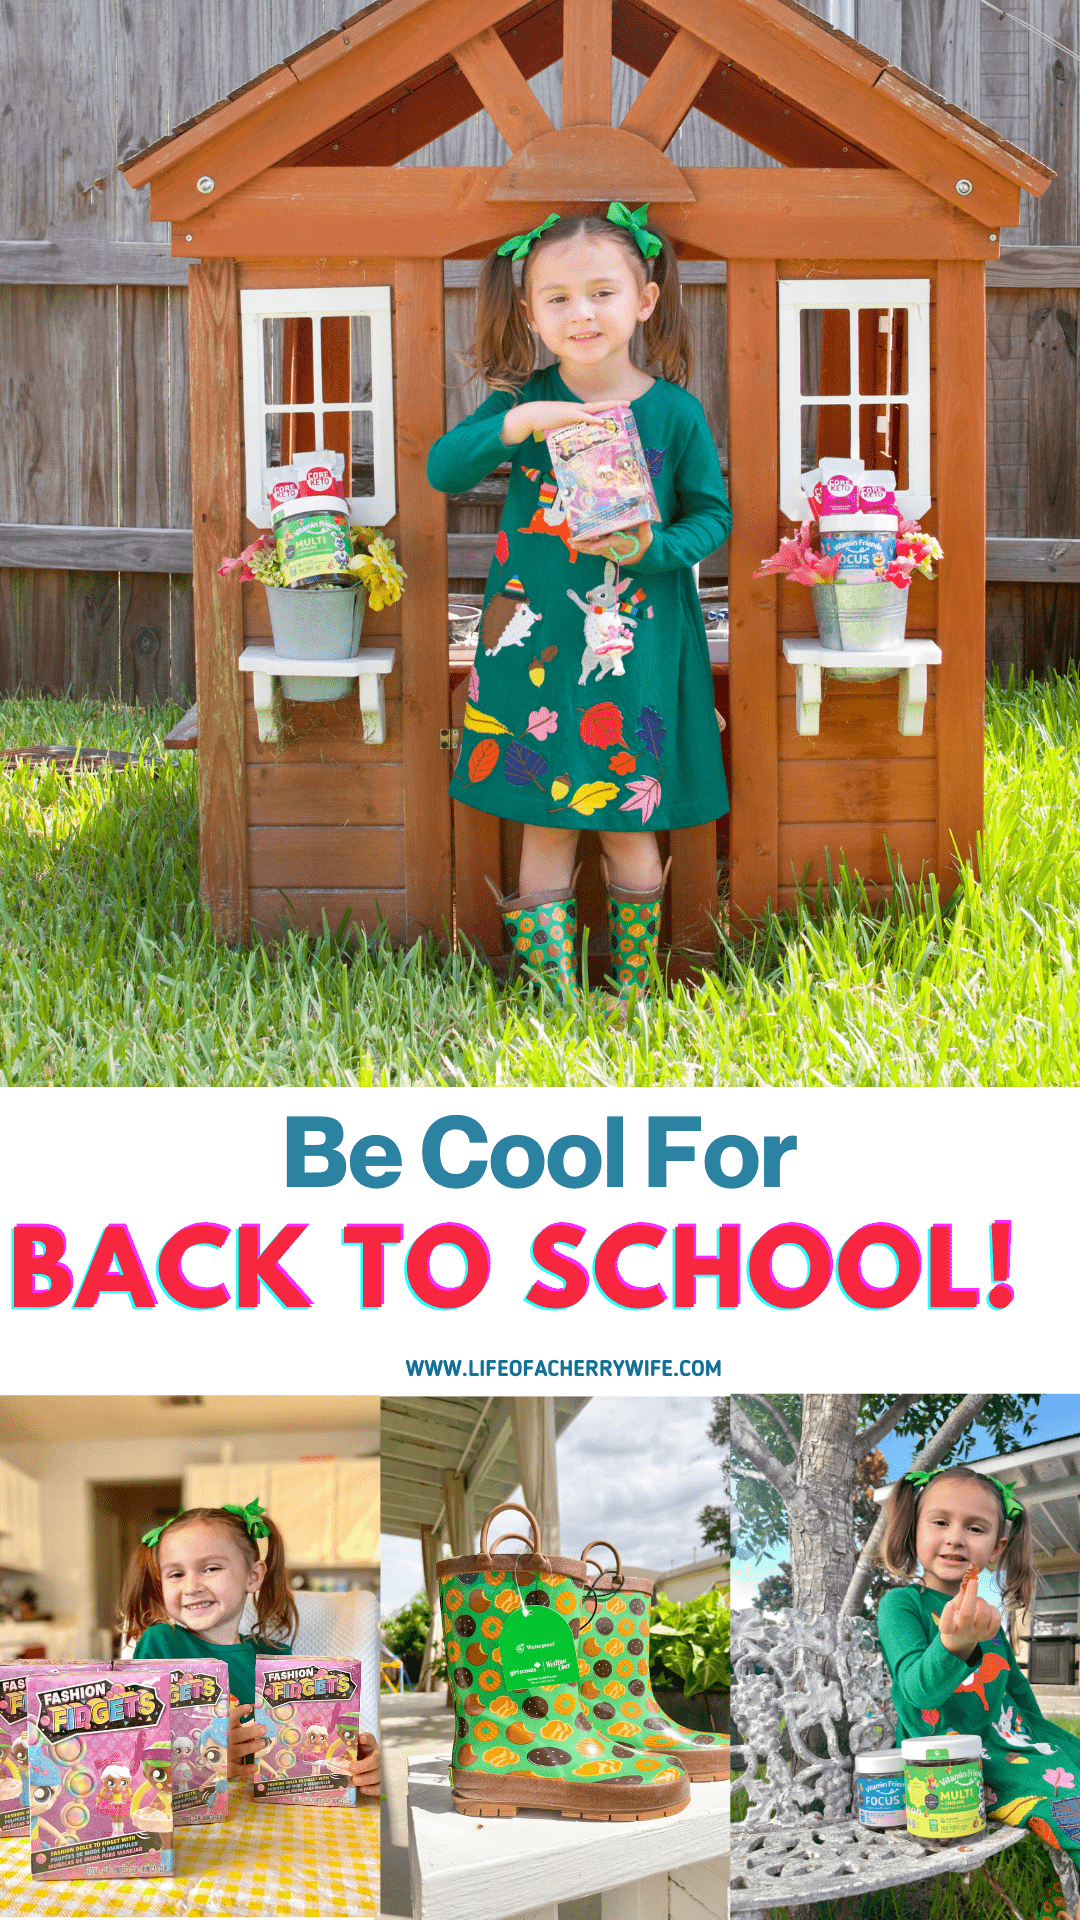 Be Cool for Back to School